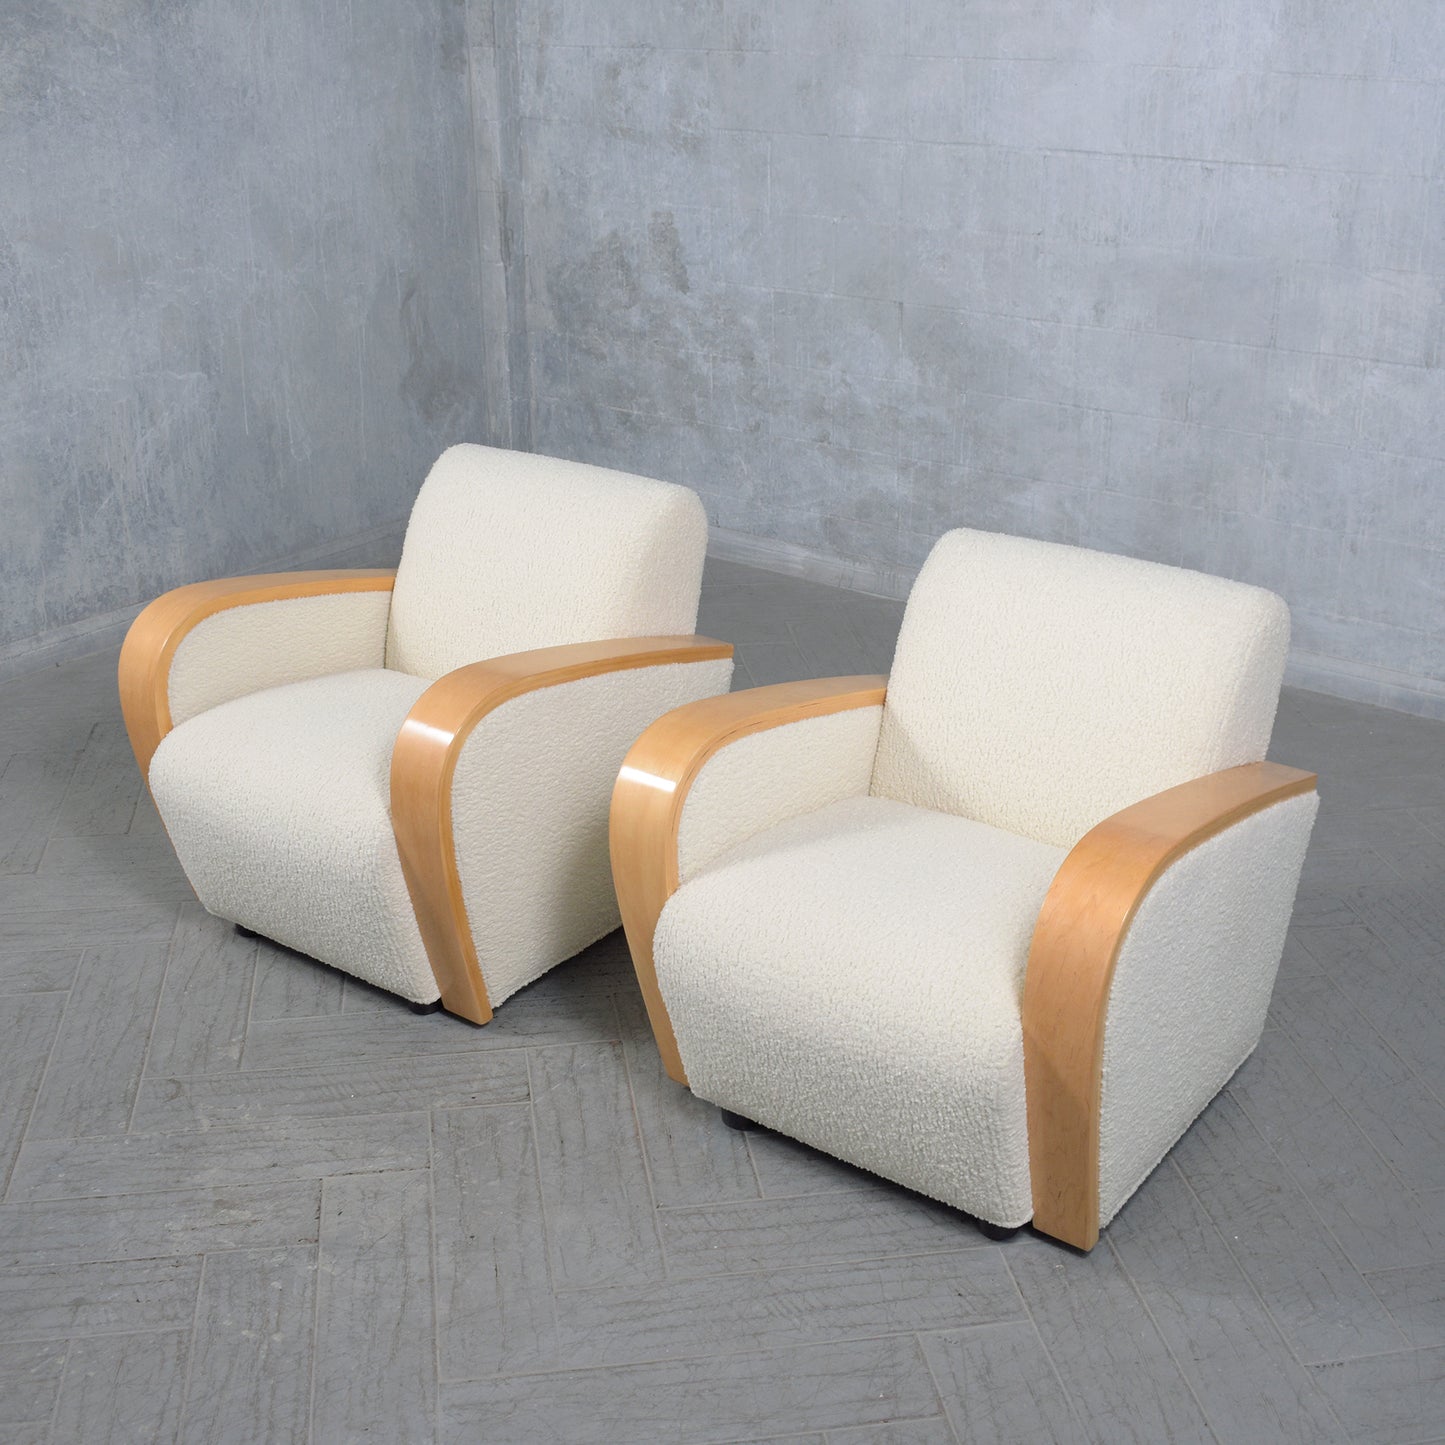 Restored Mid-Century Modern Lounge Chairs: Timeless Style in White Bouclé